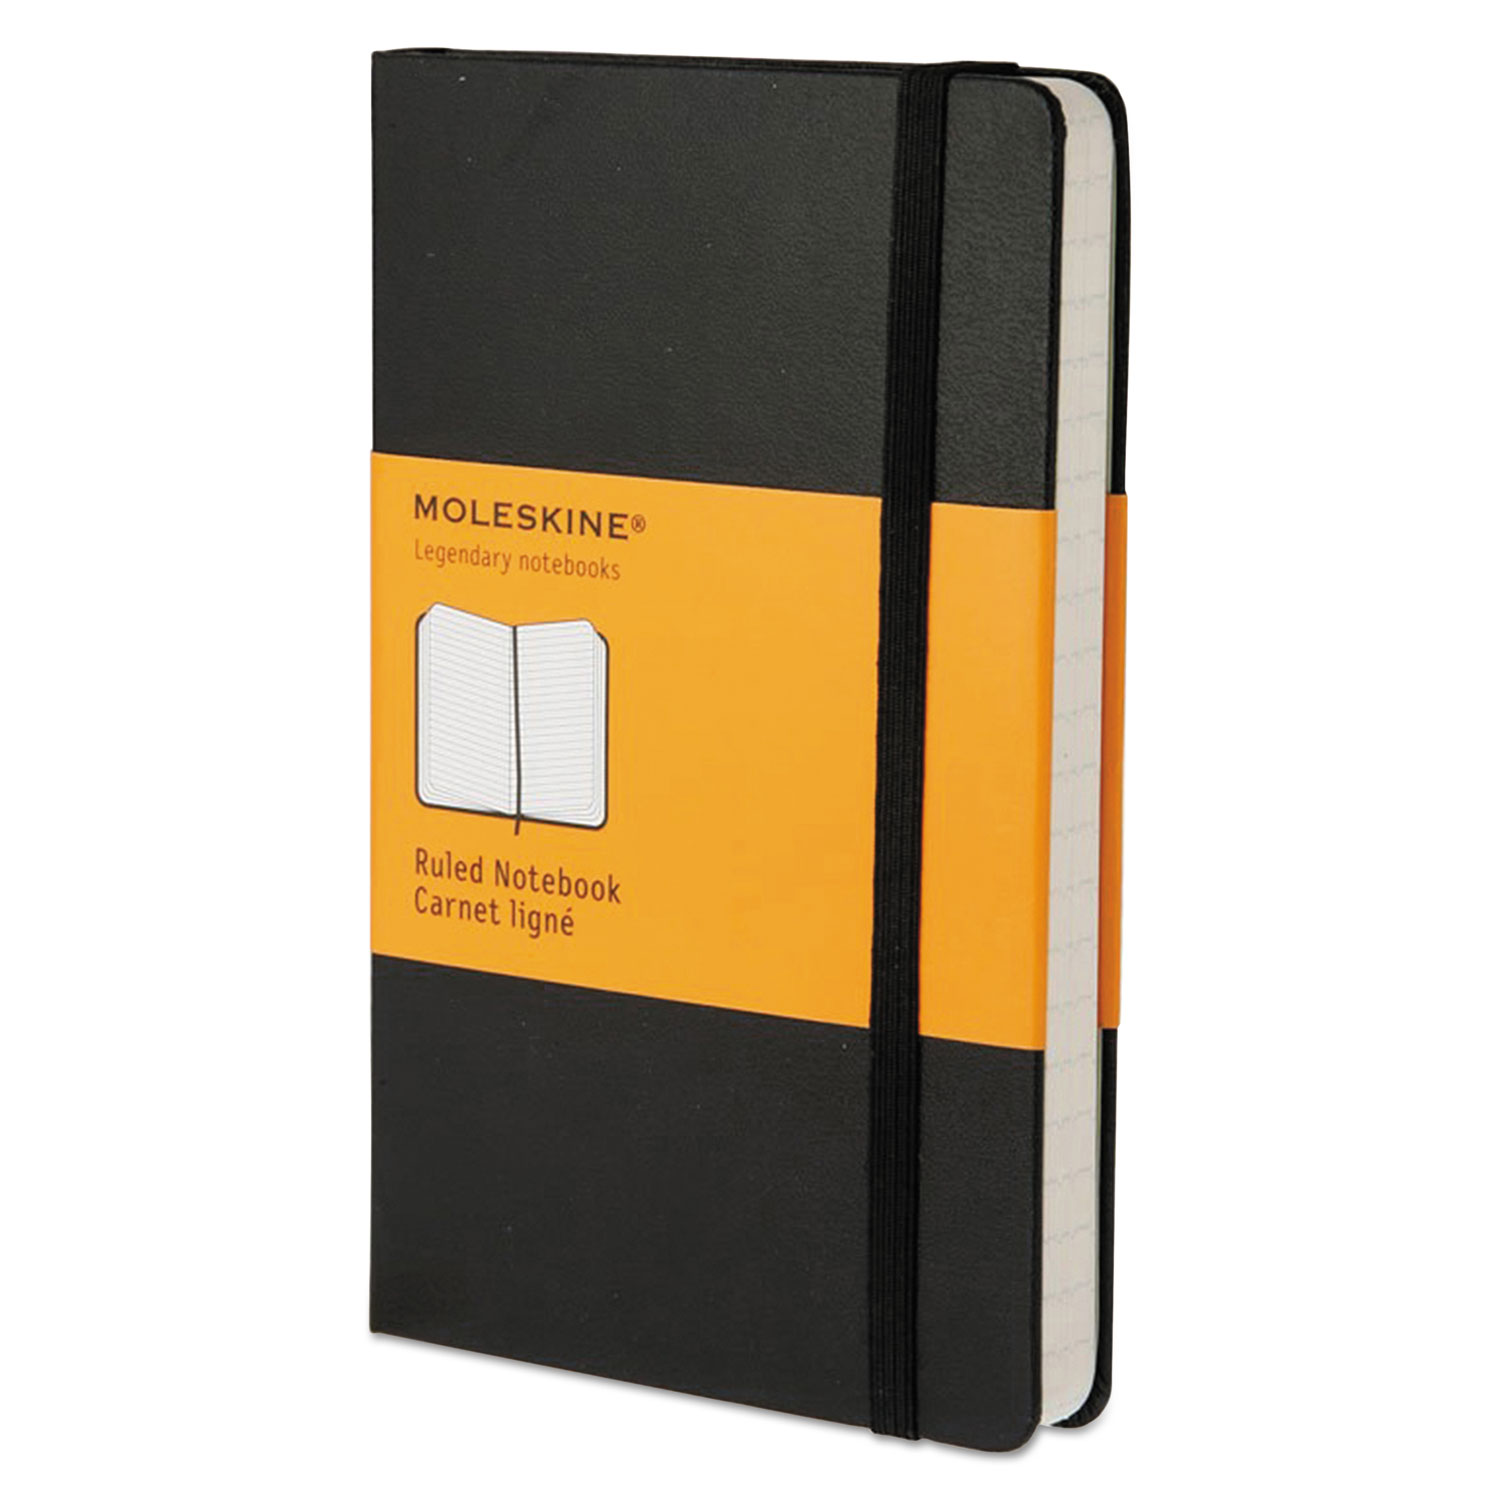  Moleskine MM710 Hard Cover Notebook, Narrow Rule, Black Cover, 5.5 x 3.5, 192 Sheets (HBGMM710) 